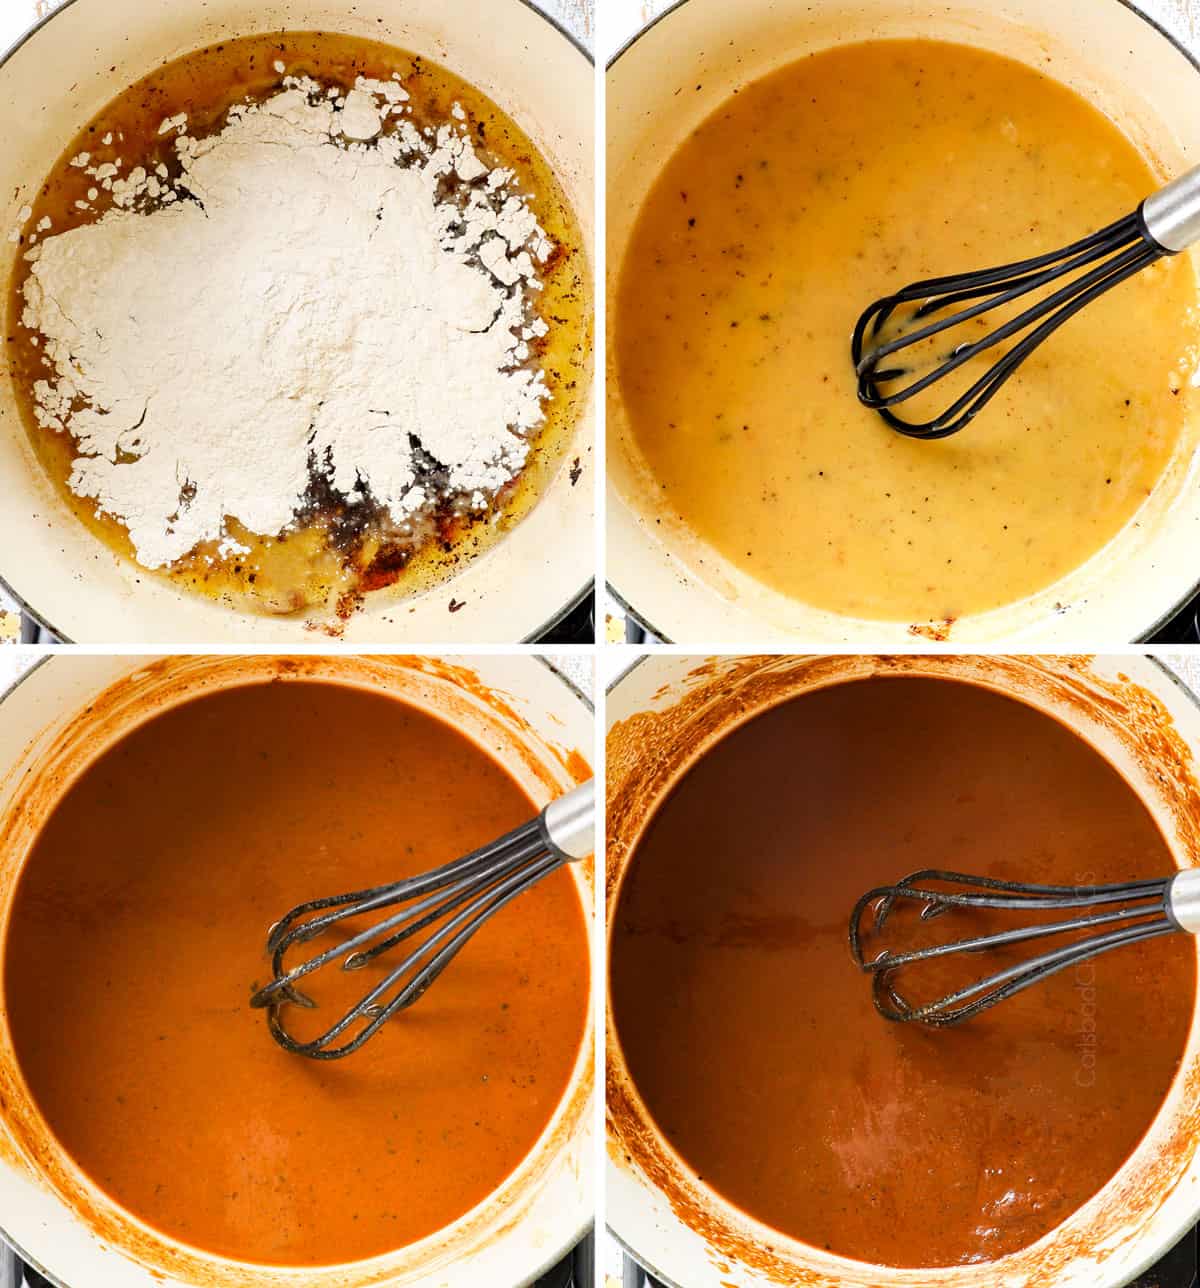 a collage showing how to make gumbo by cooking roux from blond, to chocolate to dark chocolate brown color